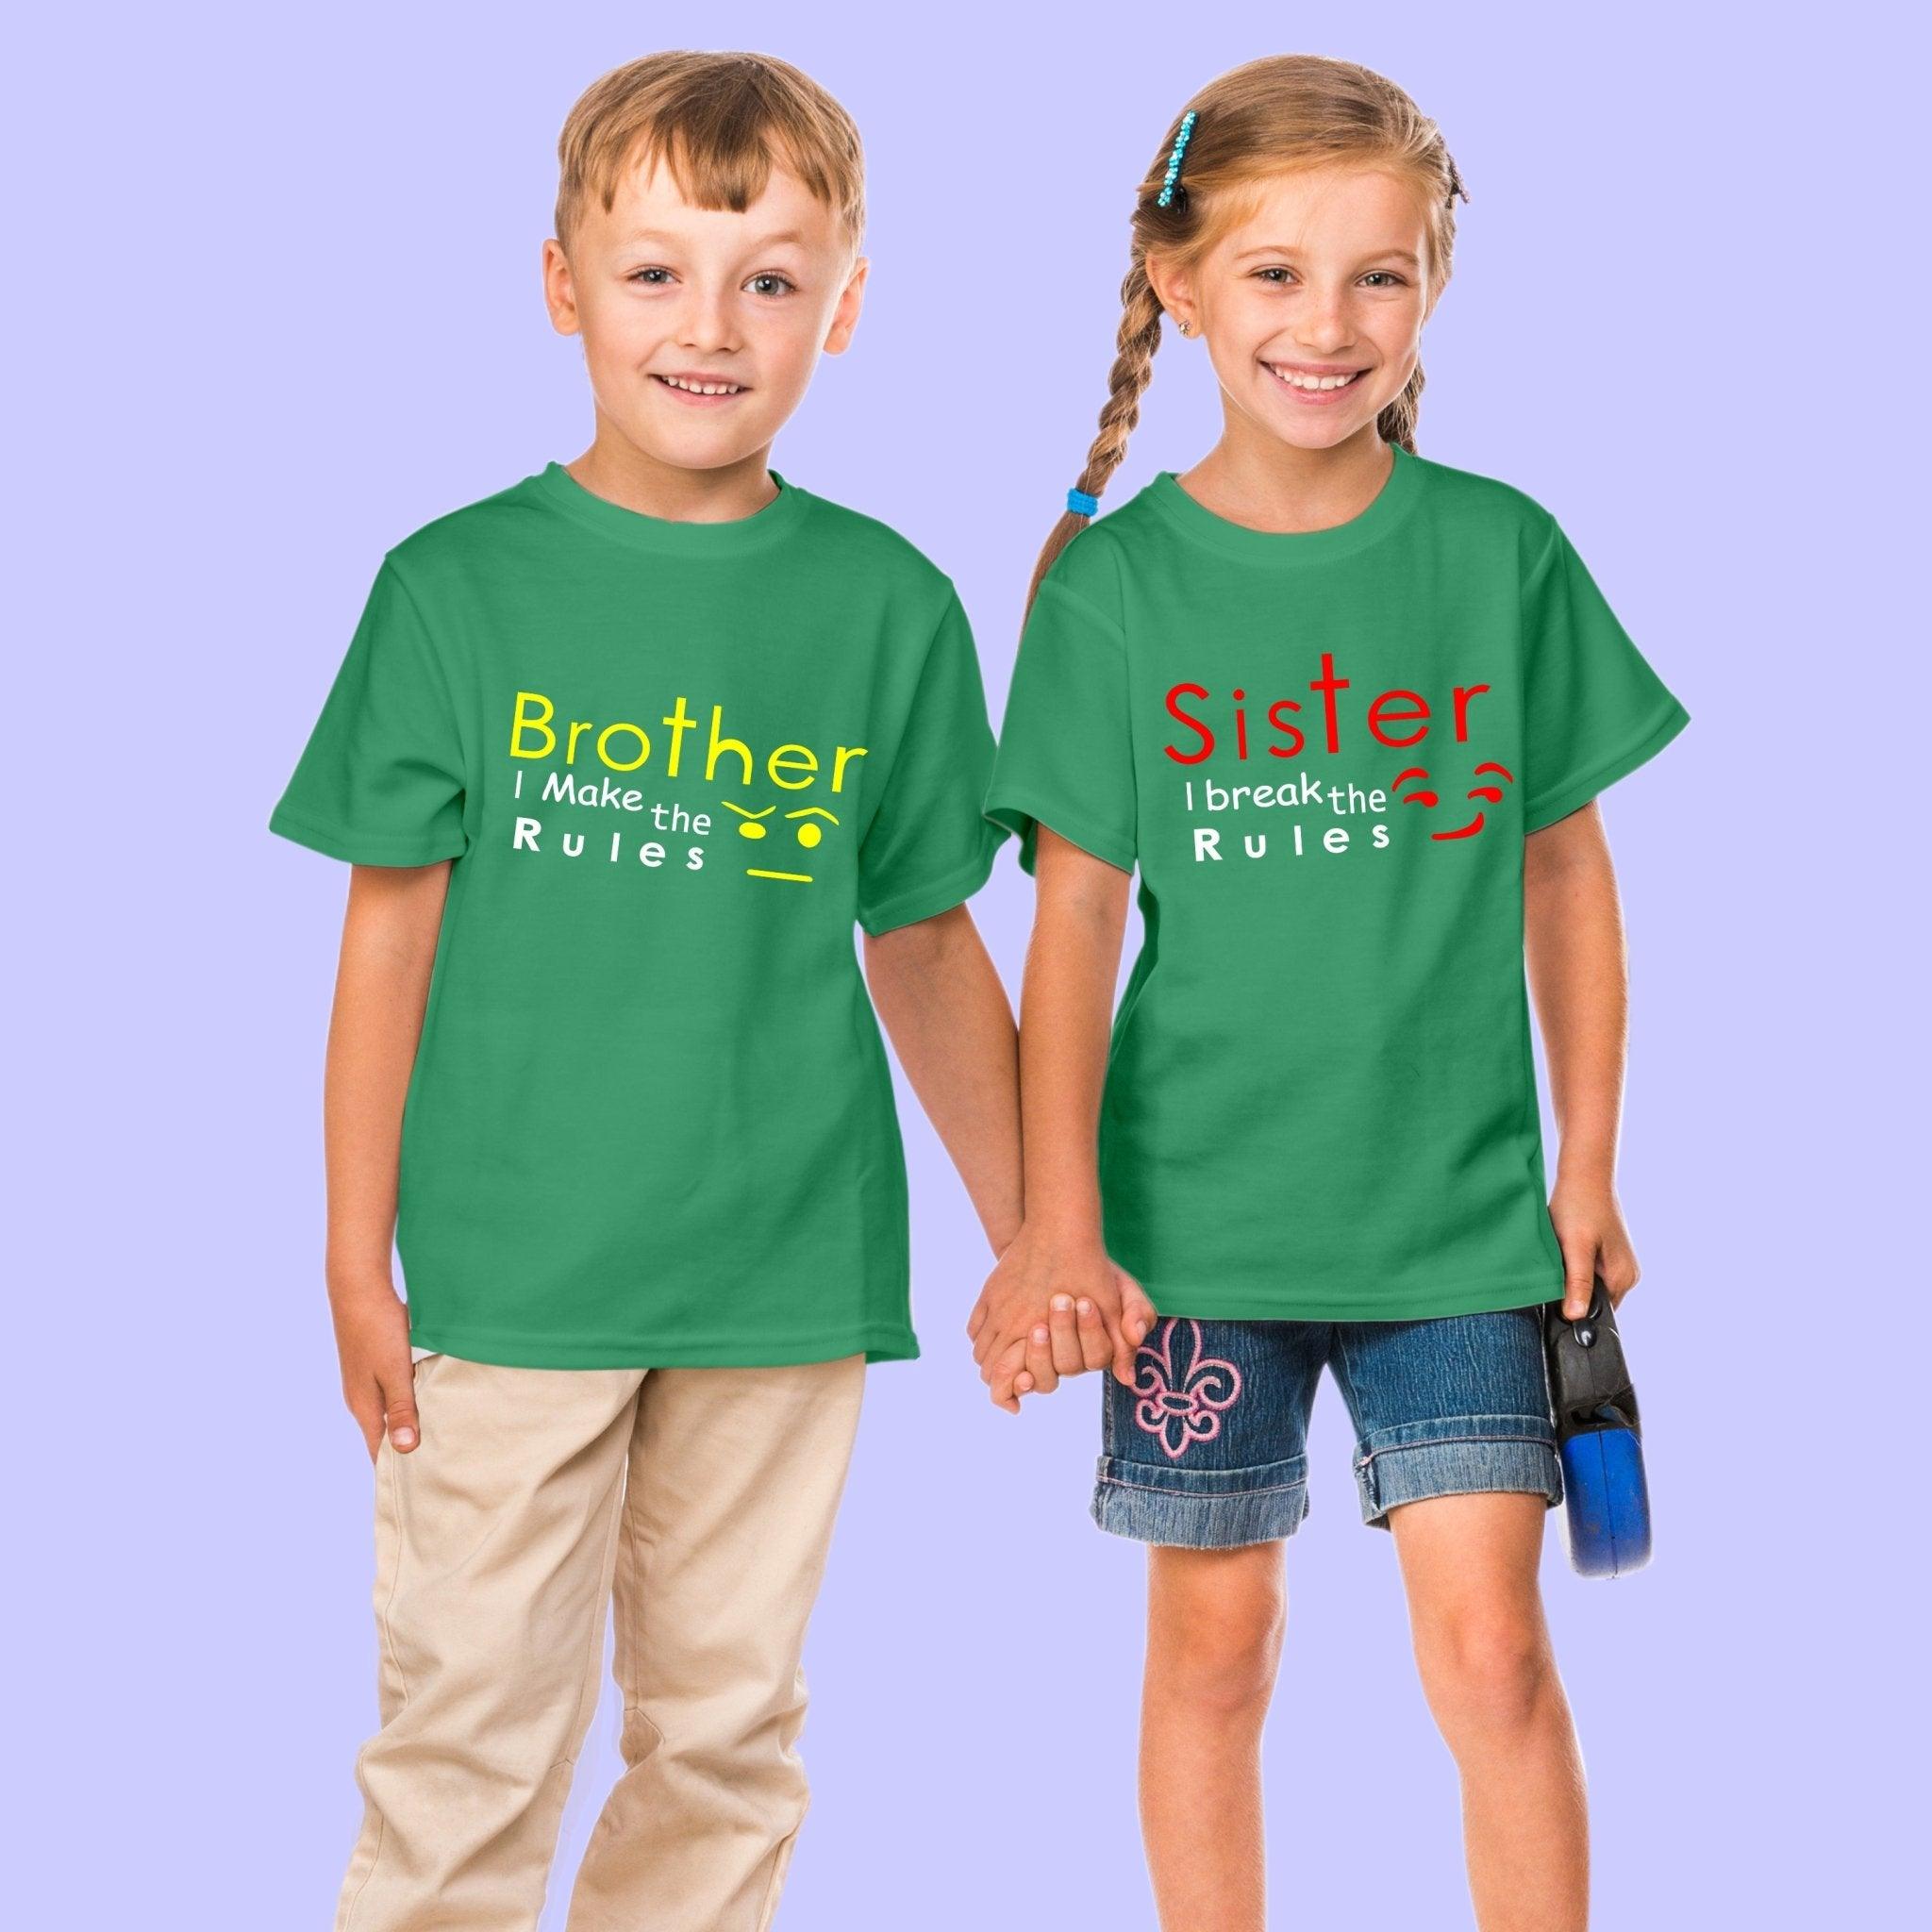 Sibling T Shirt for Kids Brother and Sister in Green Colour - Brother Makes The Rules Sister Breaks The Rules Variant